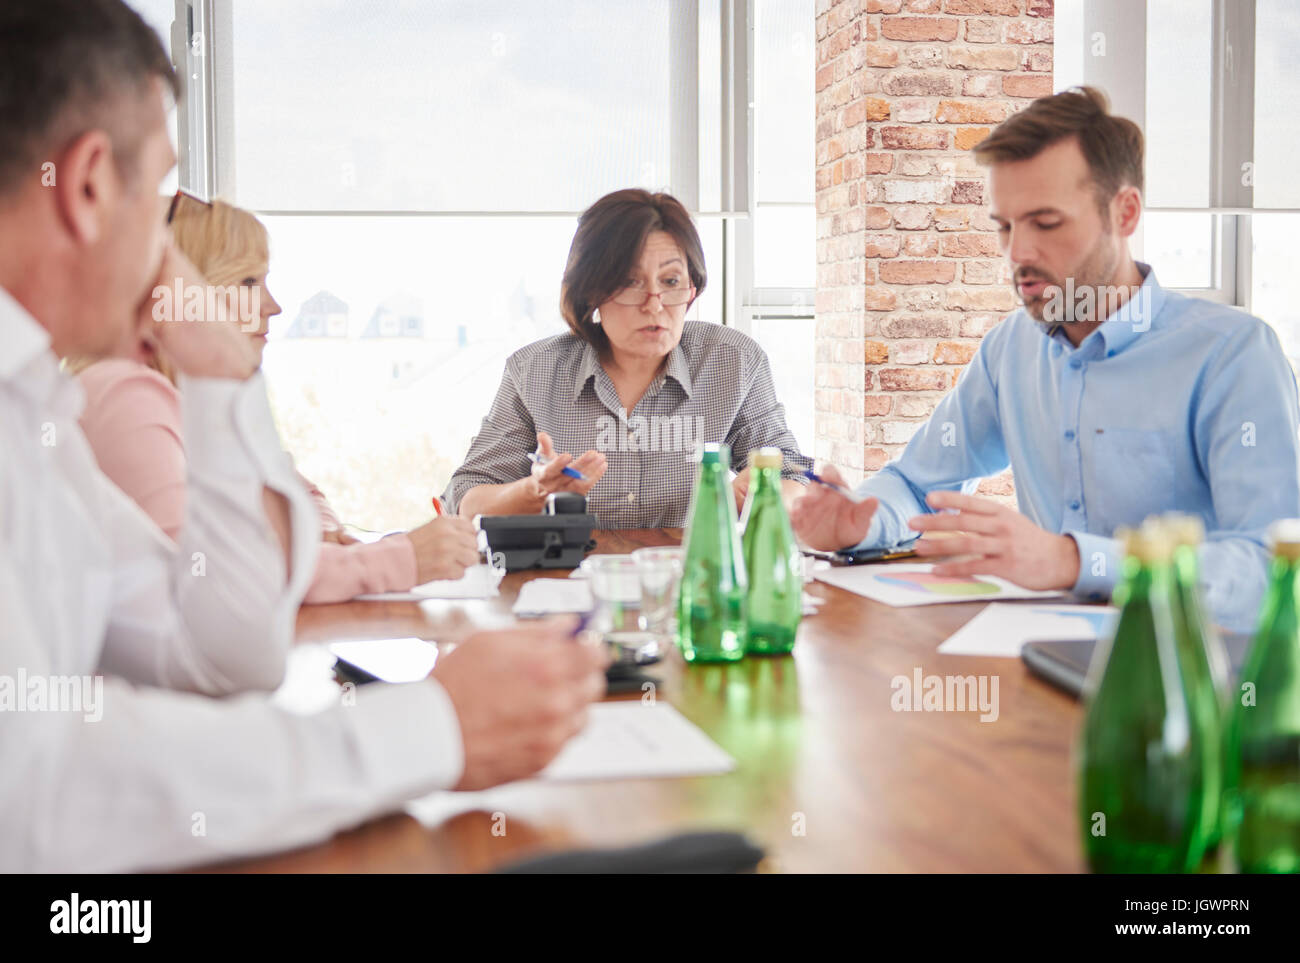 Colleagues having discussion in business meeting Stock Photo